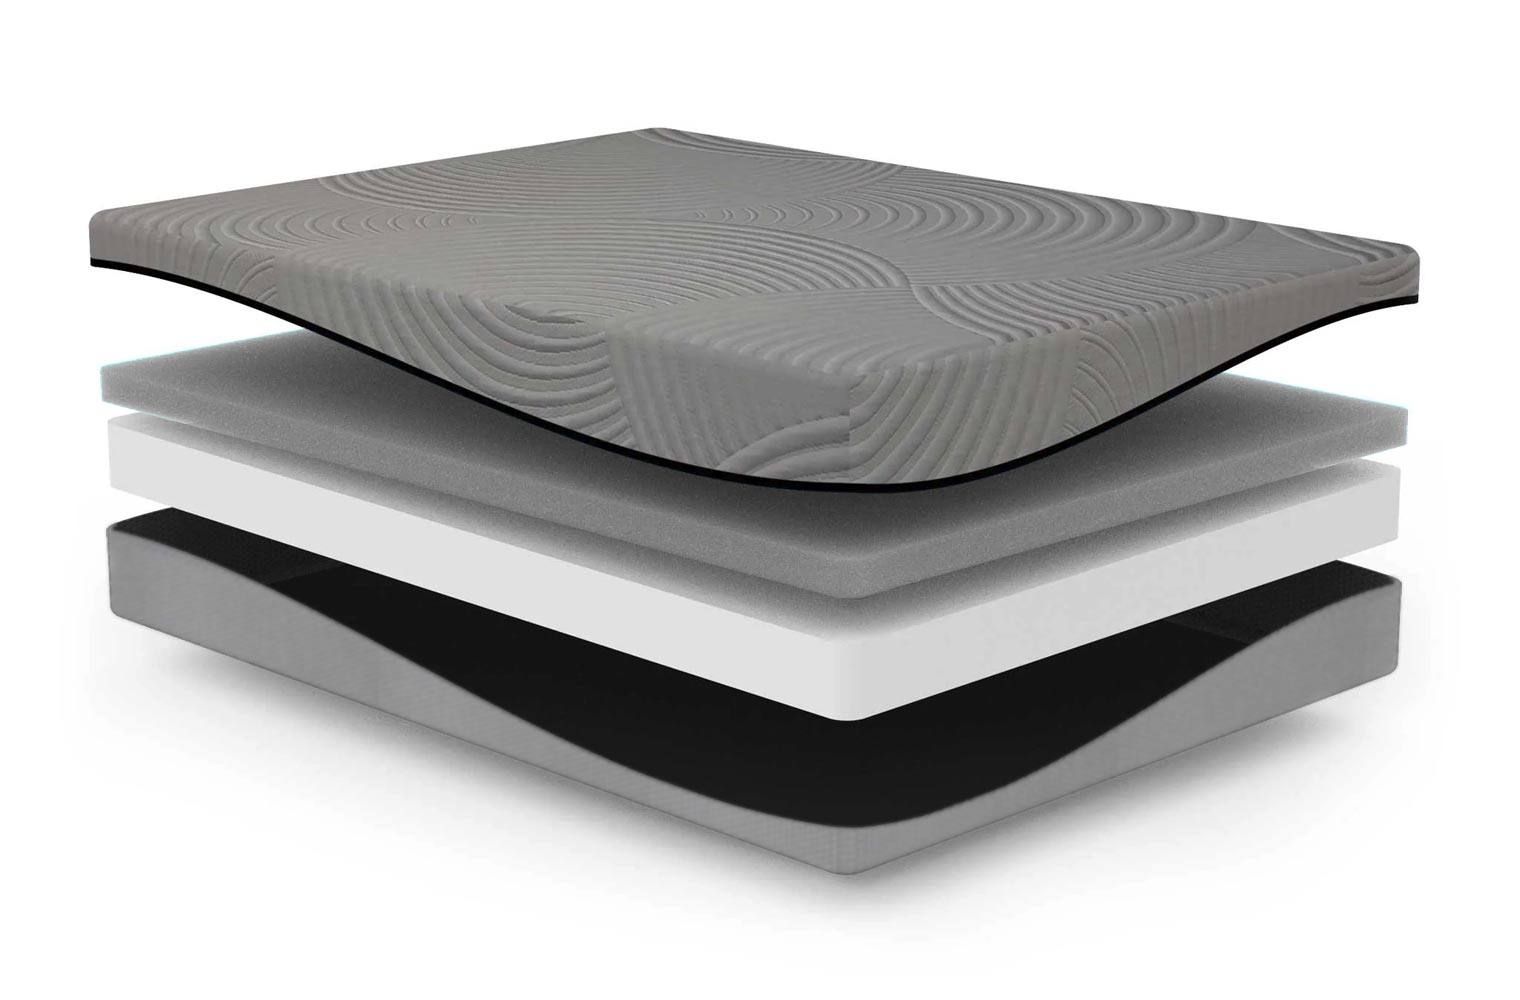 GelMax ventilated charcoal memory foam and gel support